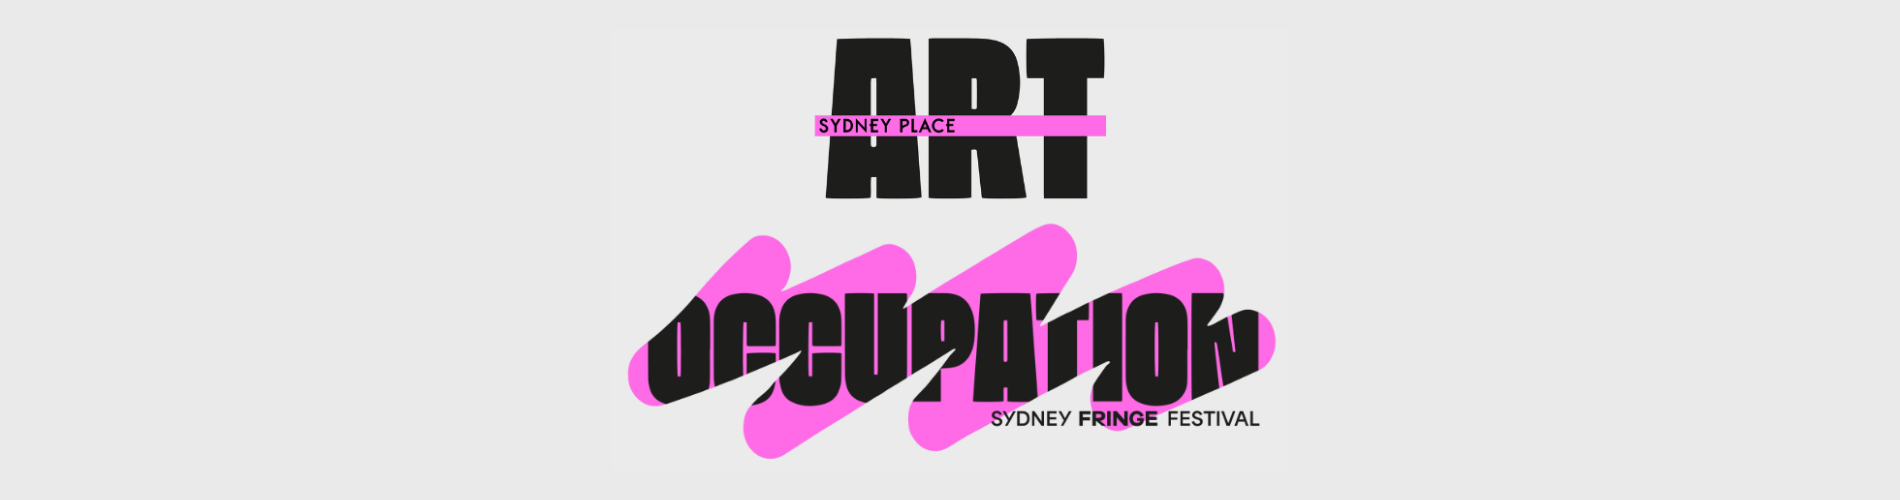 ART OCCUPATION BANNER (1900 x 500 px).png